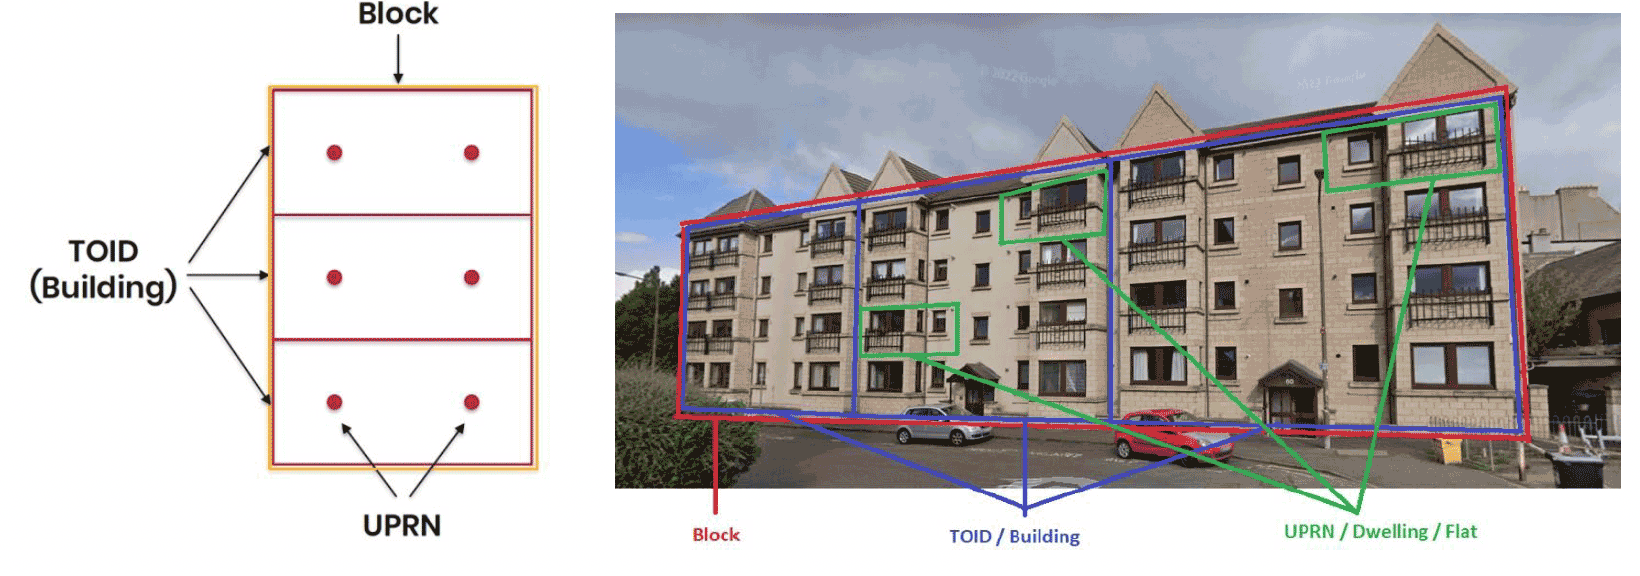 A building or block of flats with the block, UPRN and TOID pointed out.